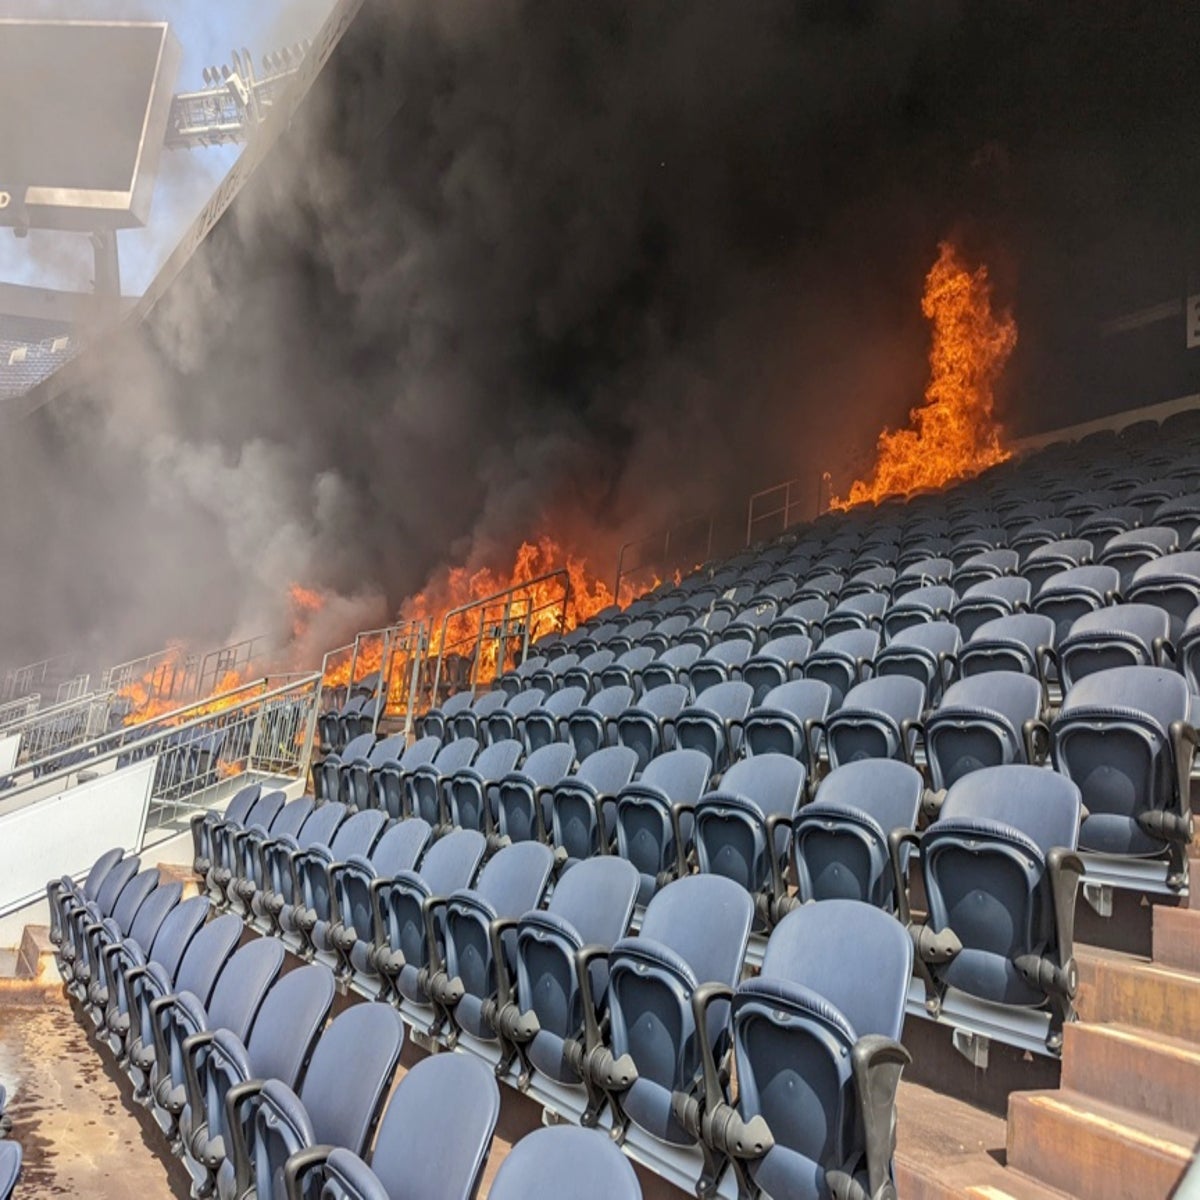 Significant' blaze torches seats and sparks evacuation at NFL stadium in  Denver